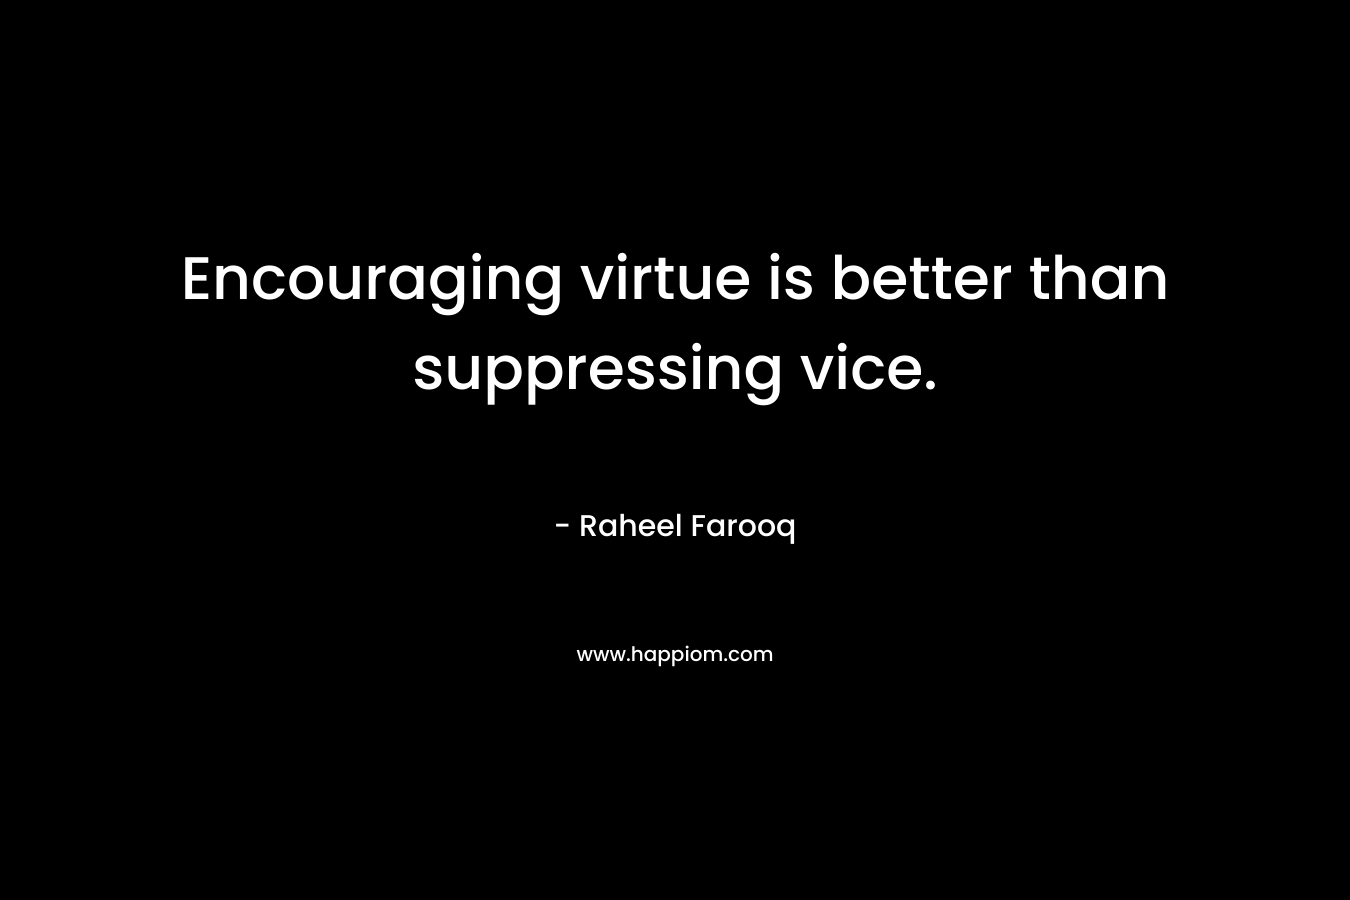 Encouraging virtue is better than suppressing vice.